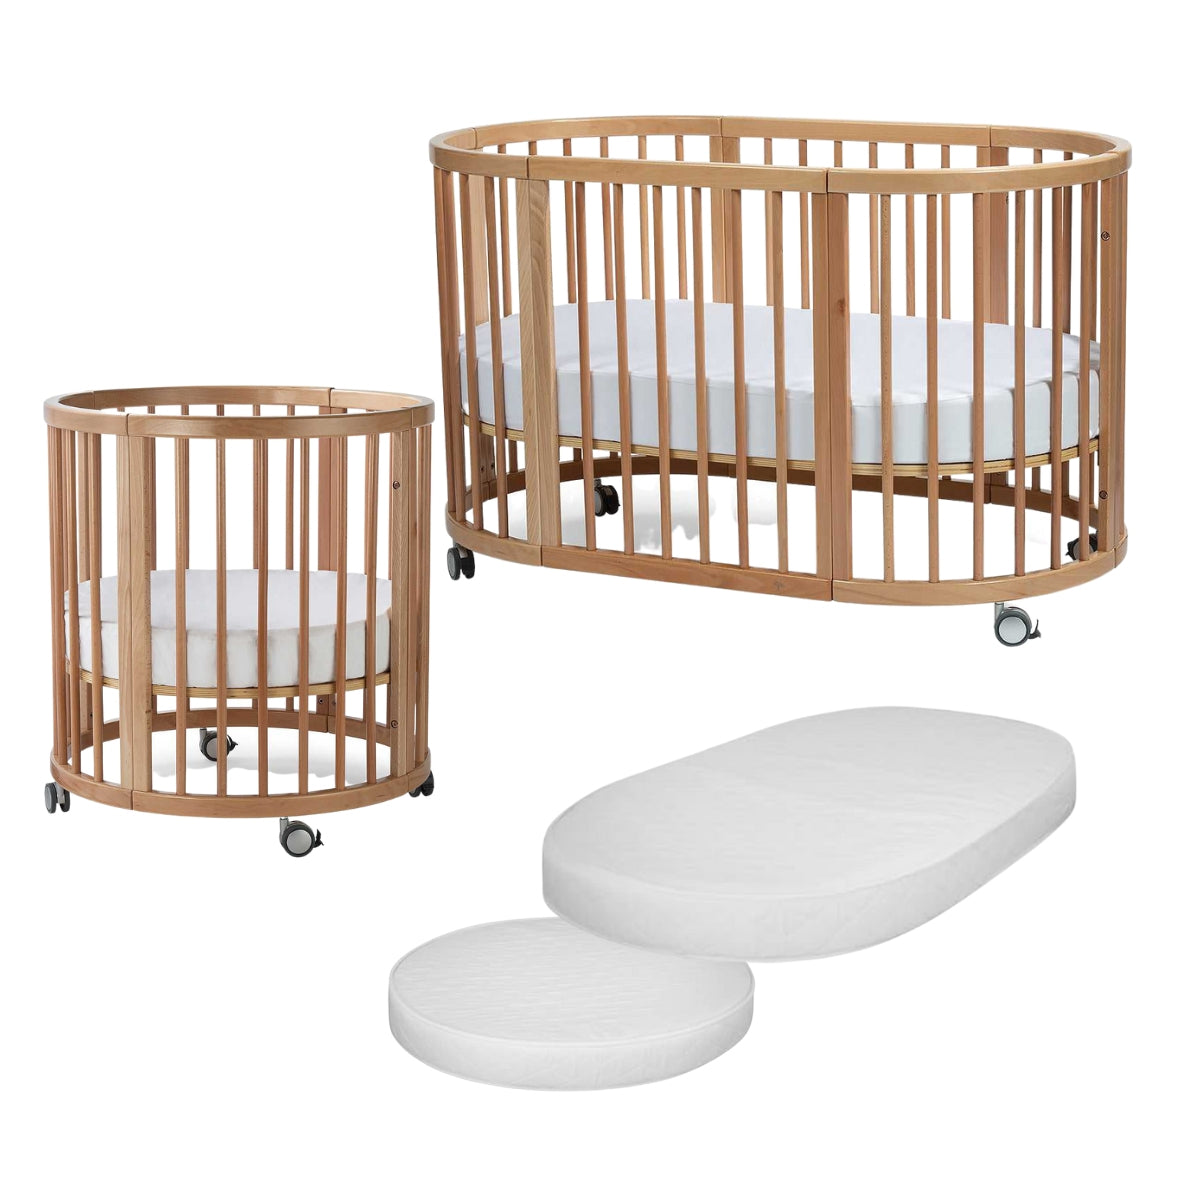 Lolli Sprout Cot 4 in 1 Natural with Mattress - Tiny Tots Baby Store 